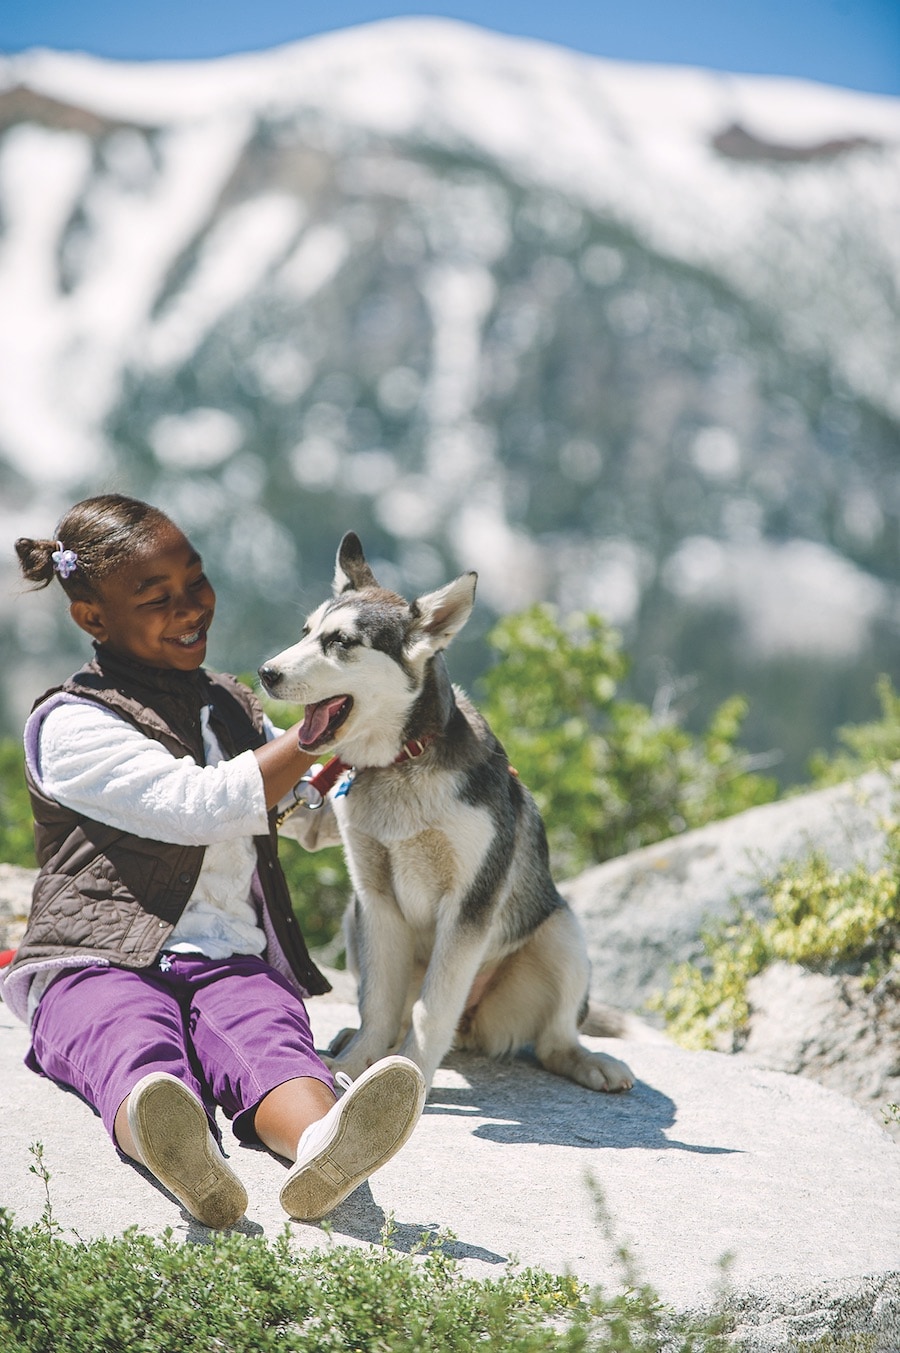 Get up close with a Husky on the Adventures by Disney Alaska vacation